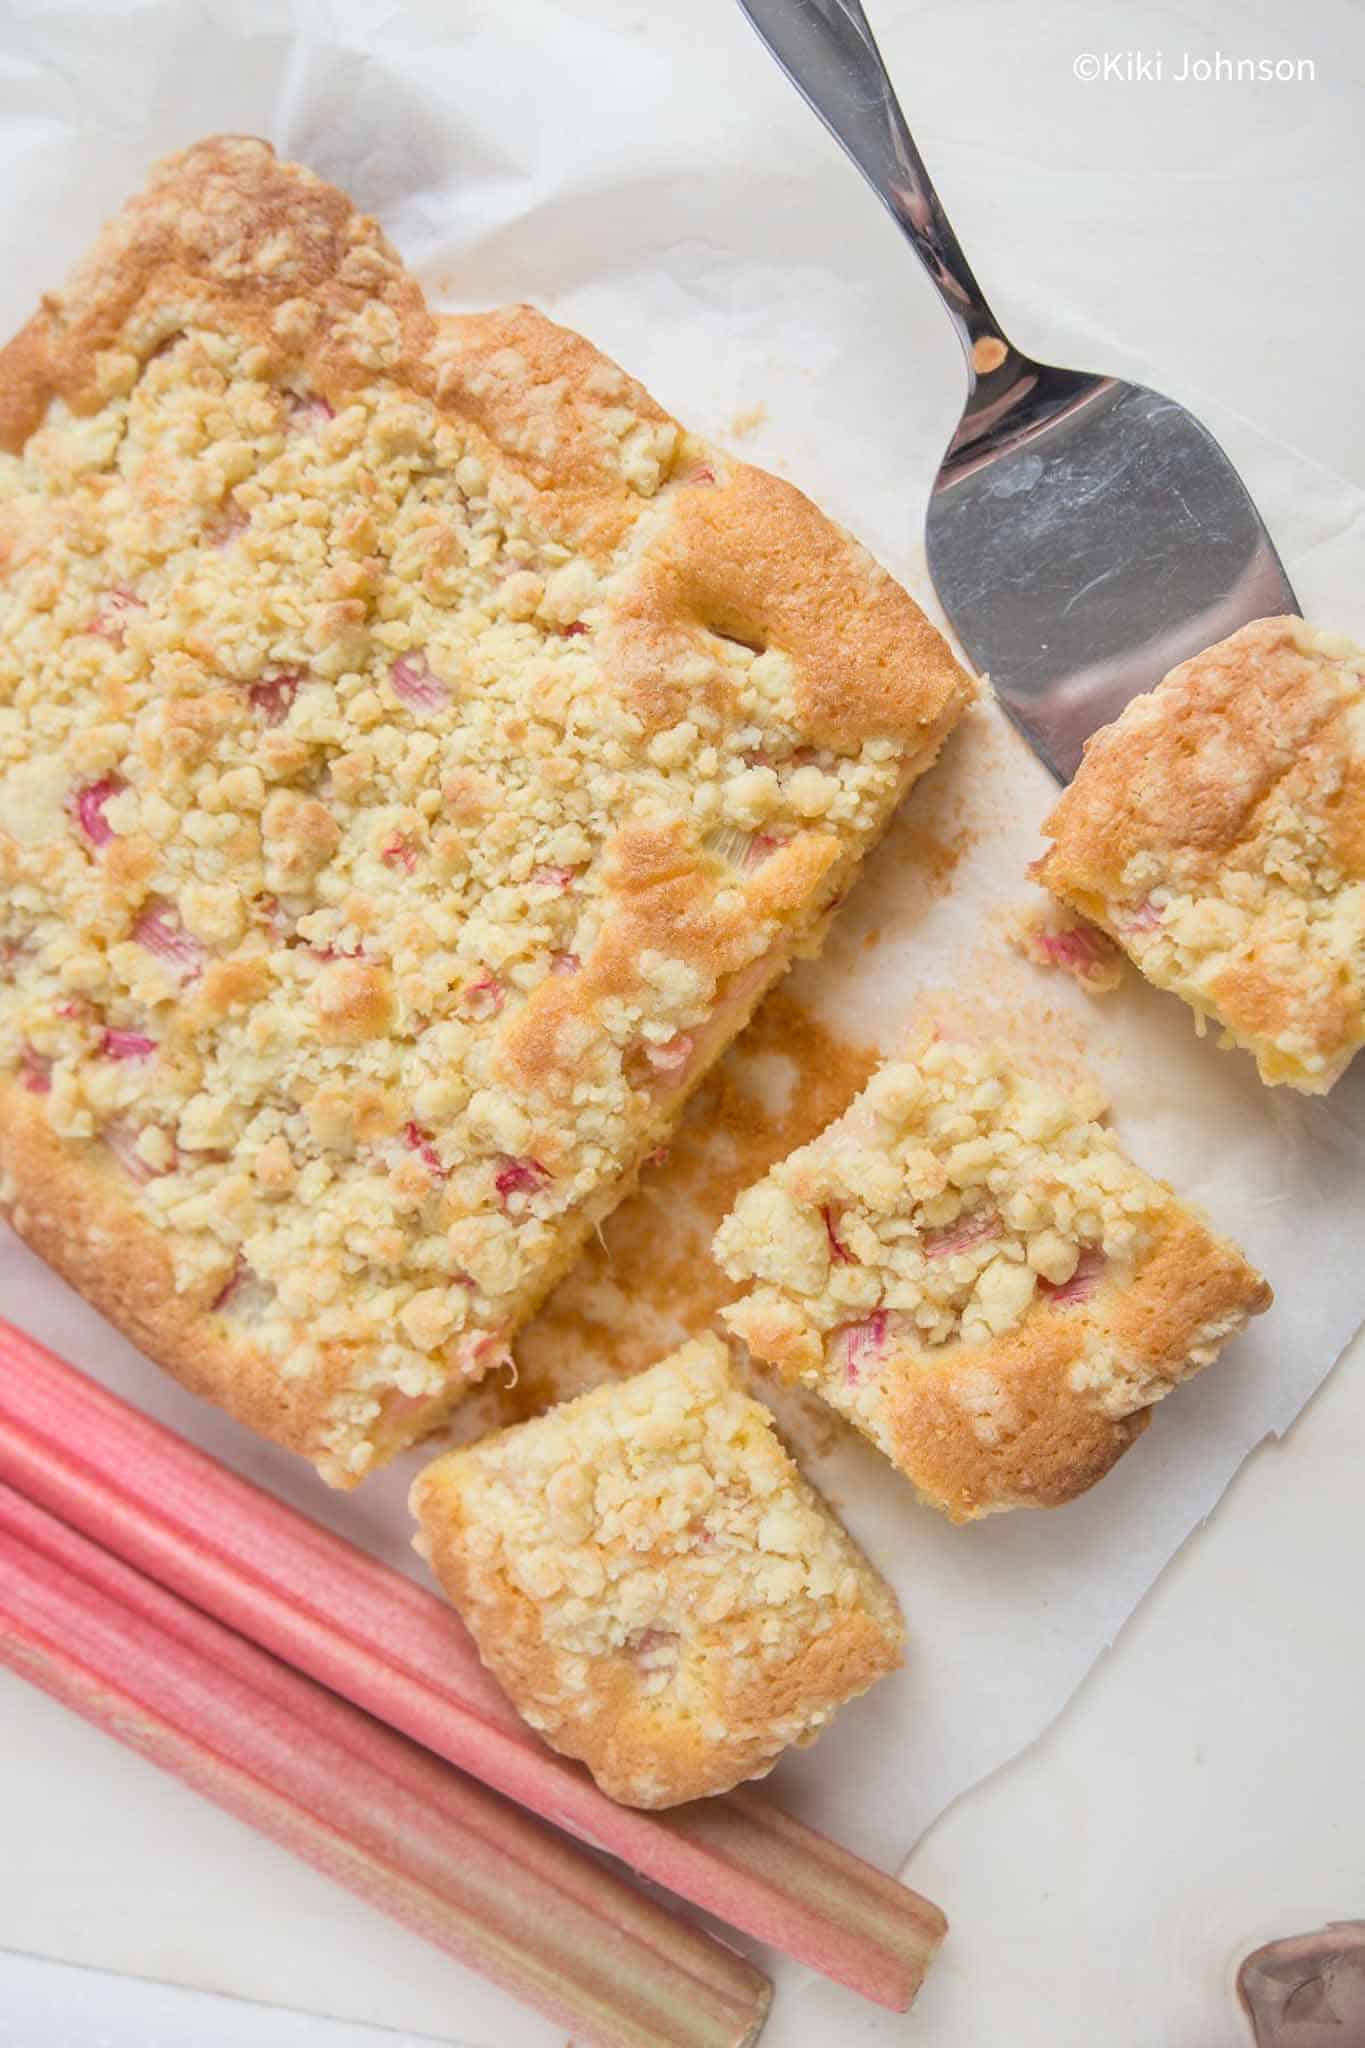 German Rhubarb Traybake with streusel topping on a piece of baking sheet 